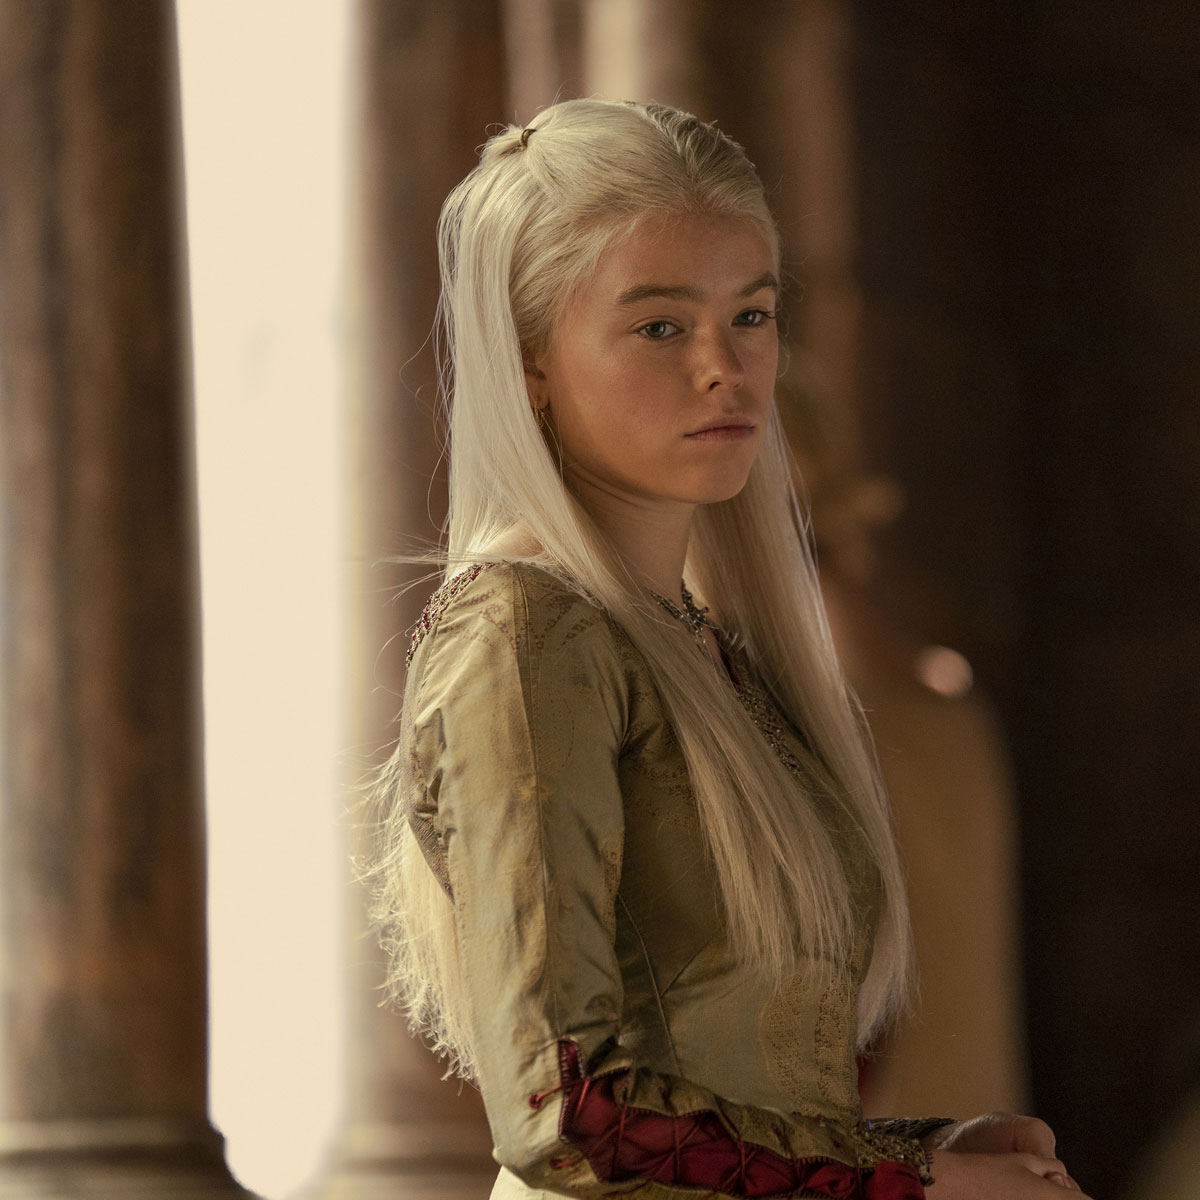 The Latest House of the Dragon Drama Has Us Firmly Planted as Team Rhaenyra